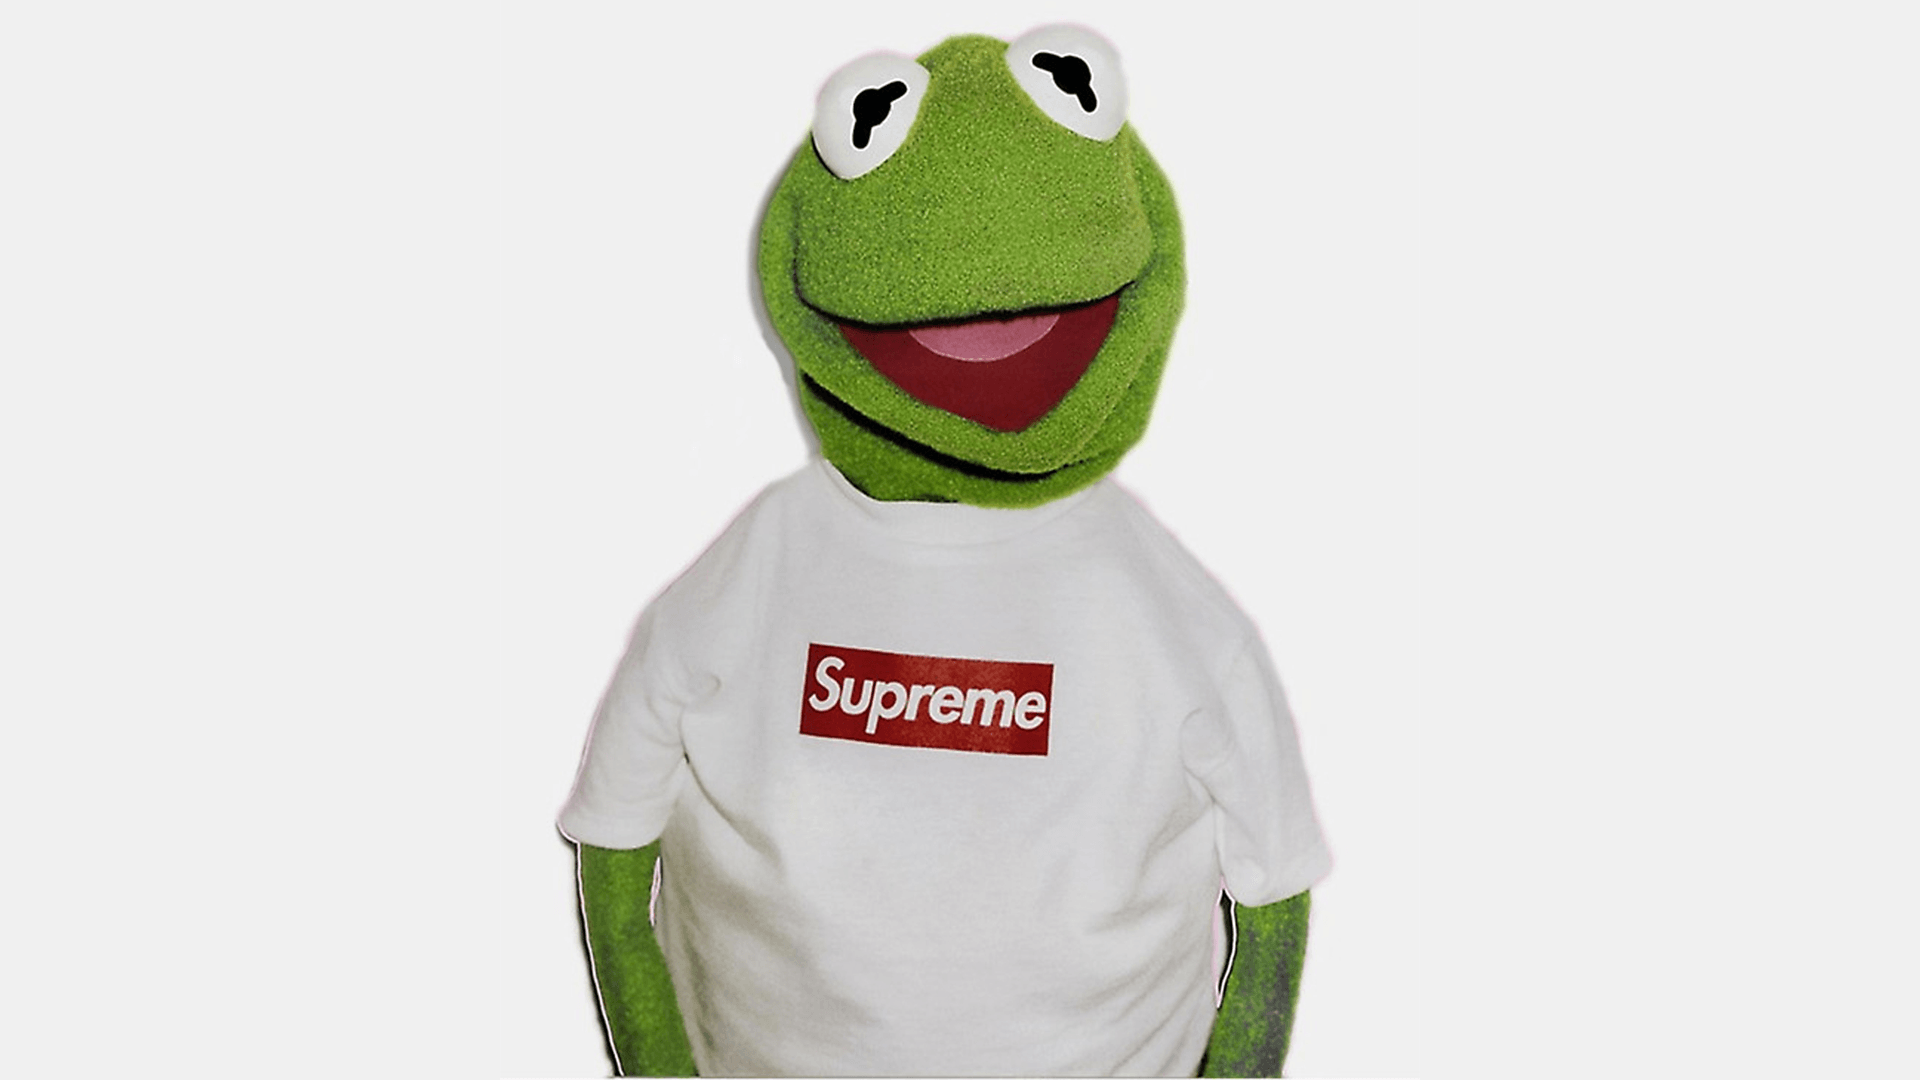 Kermit Supreme Wallpaper (1920x1080), Couldn't find one so made one